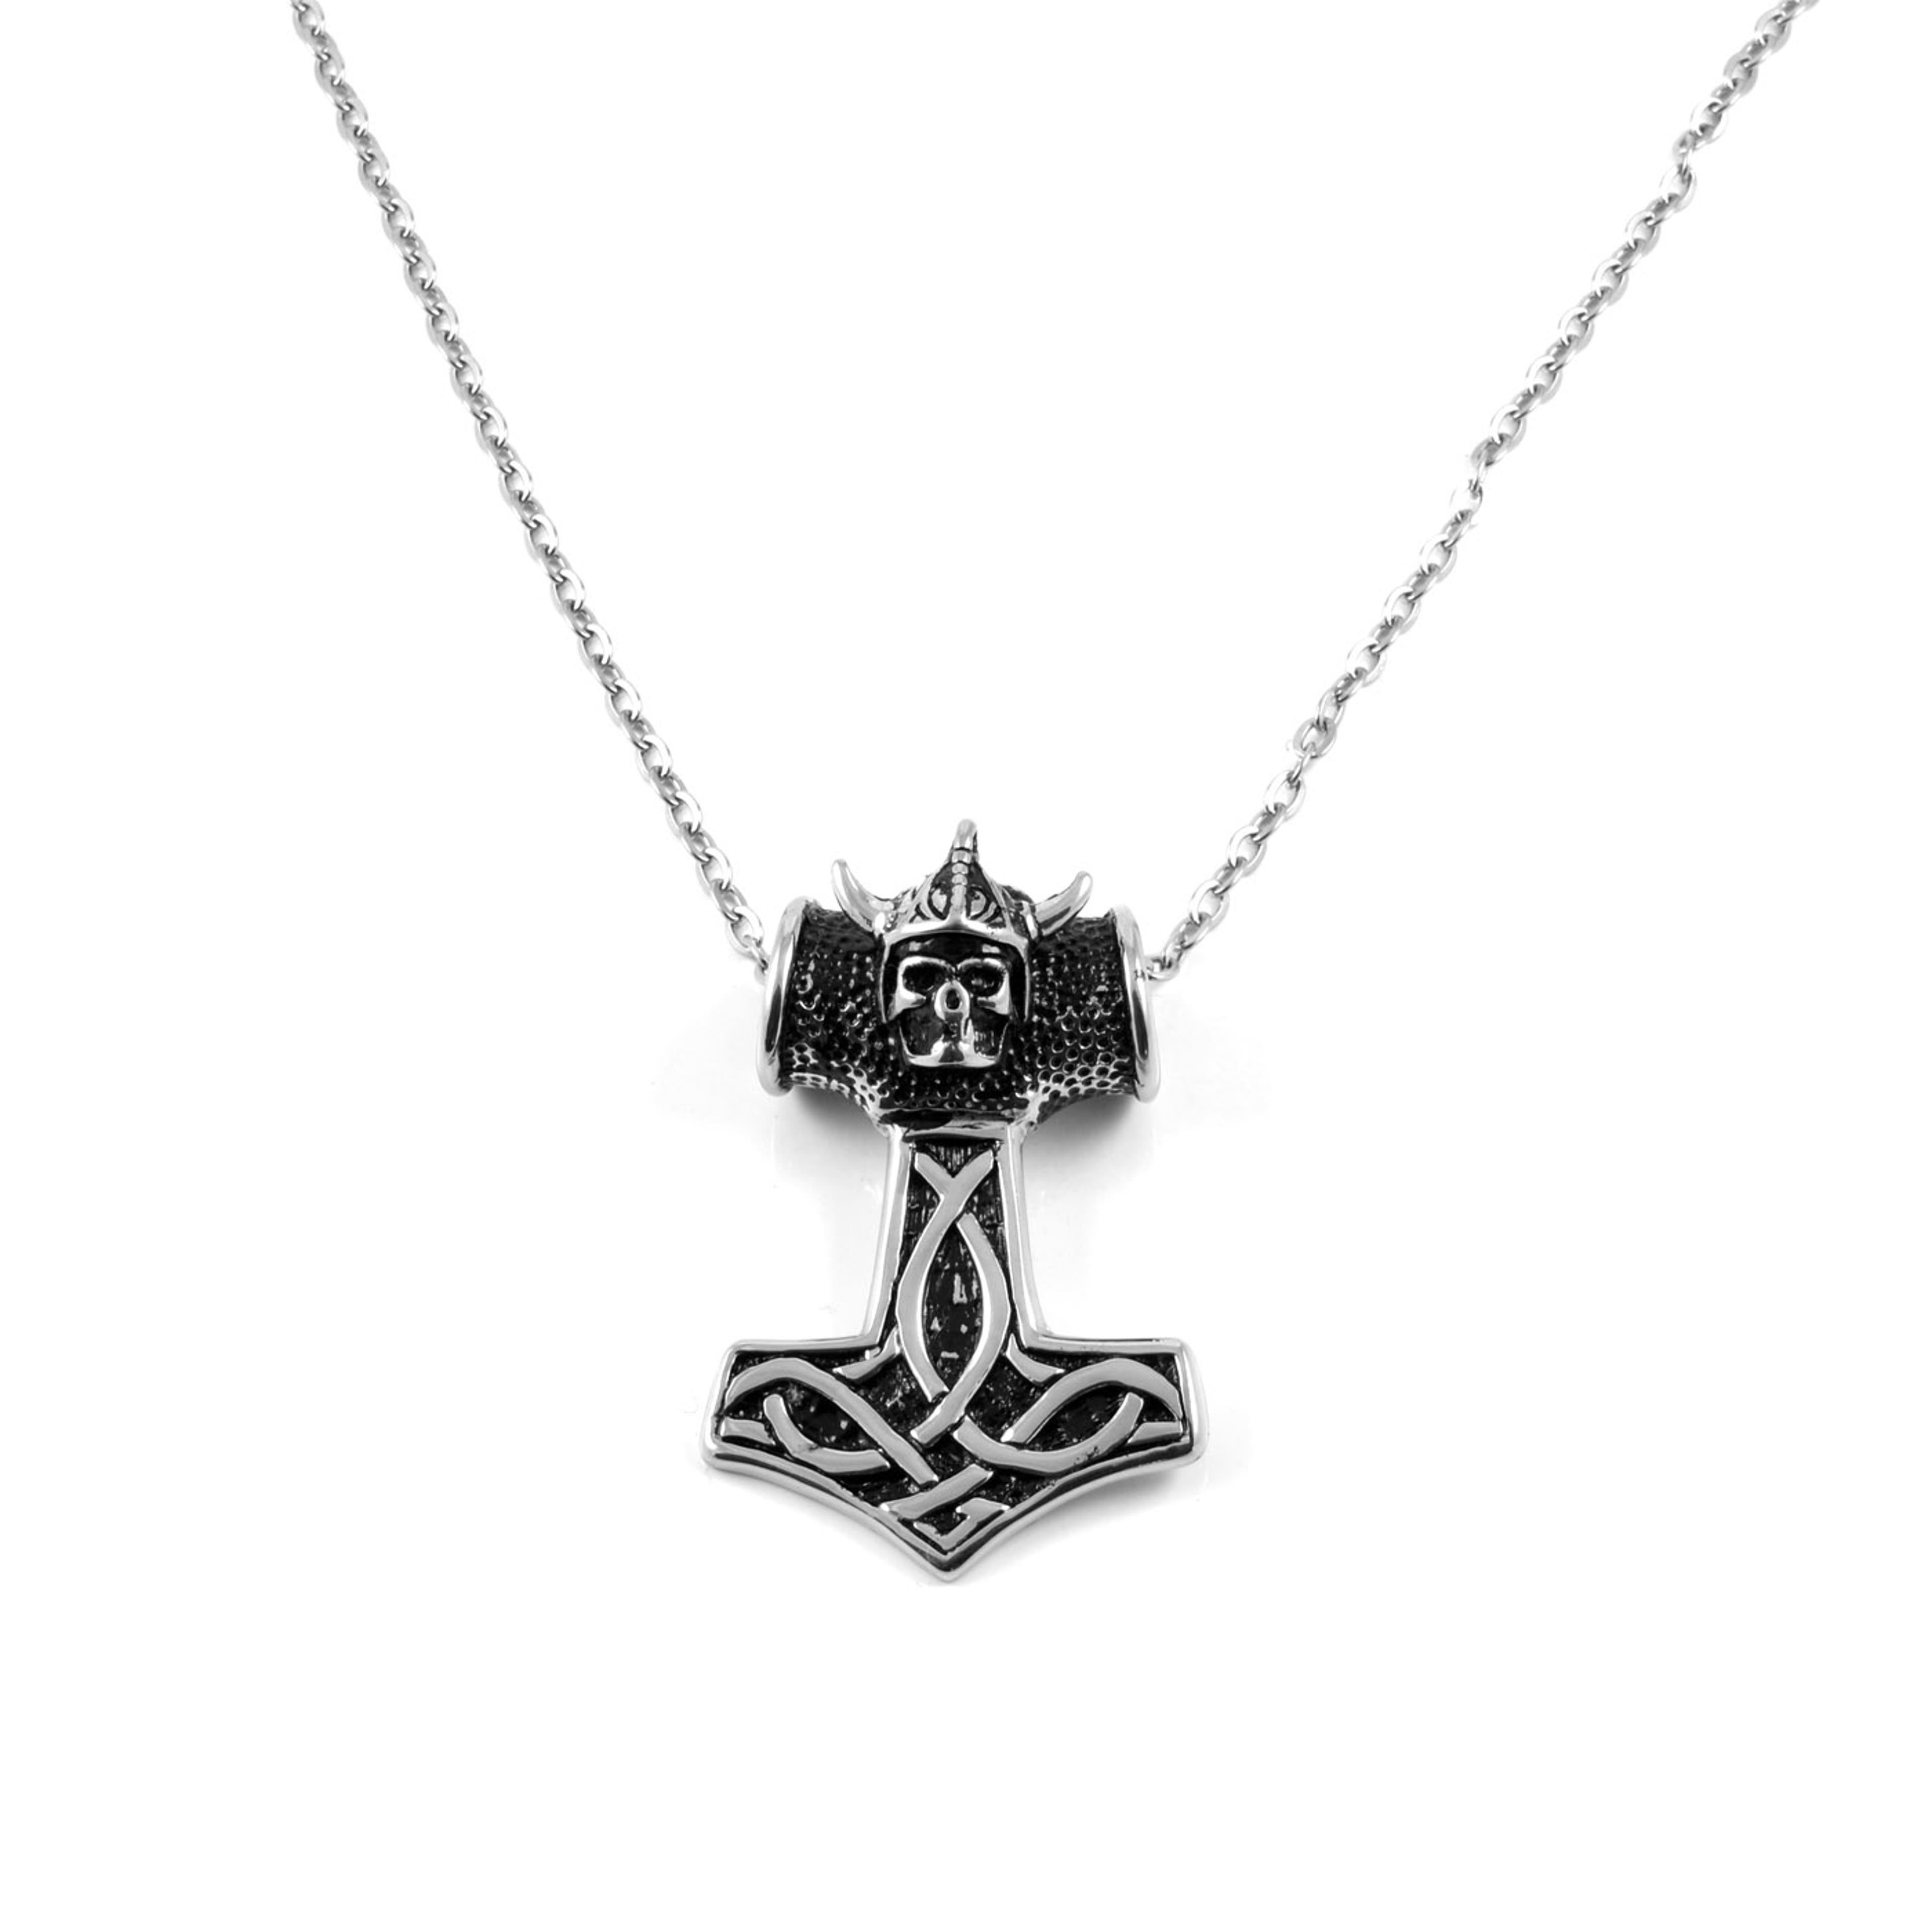 Silver-Tone Stainless Steel Thor's Hammer & Skull Cable Chain Necklace